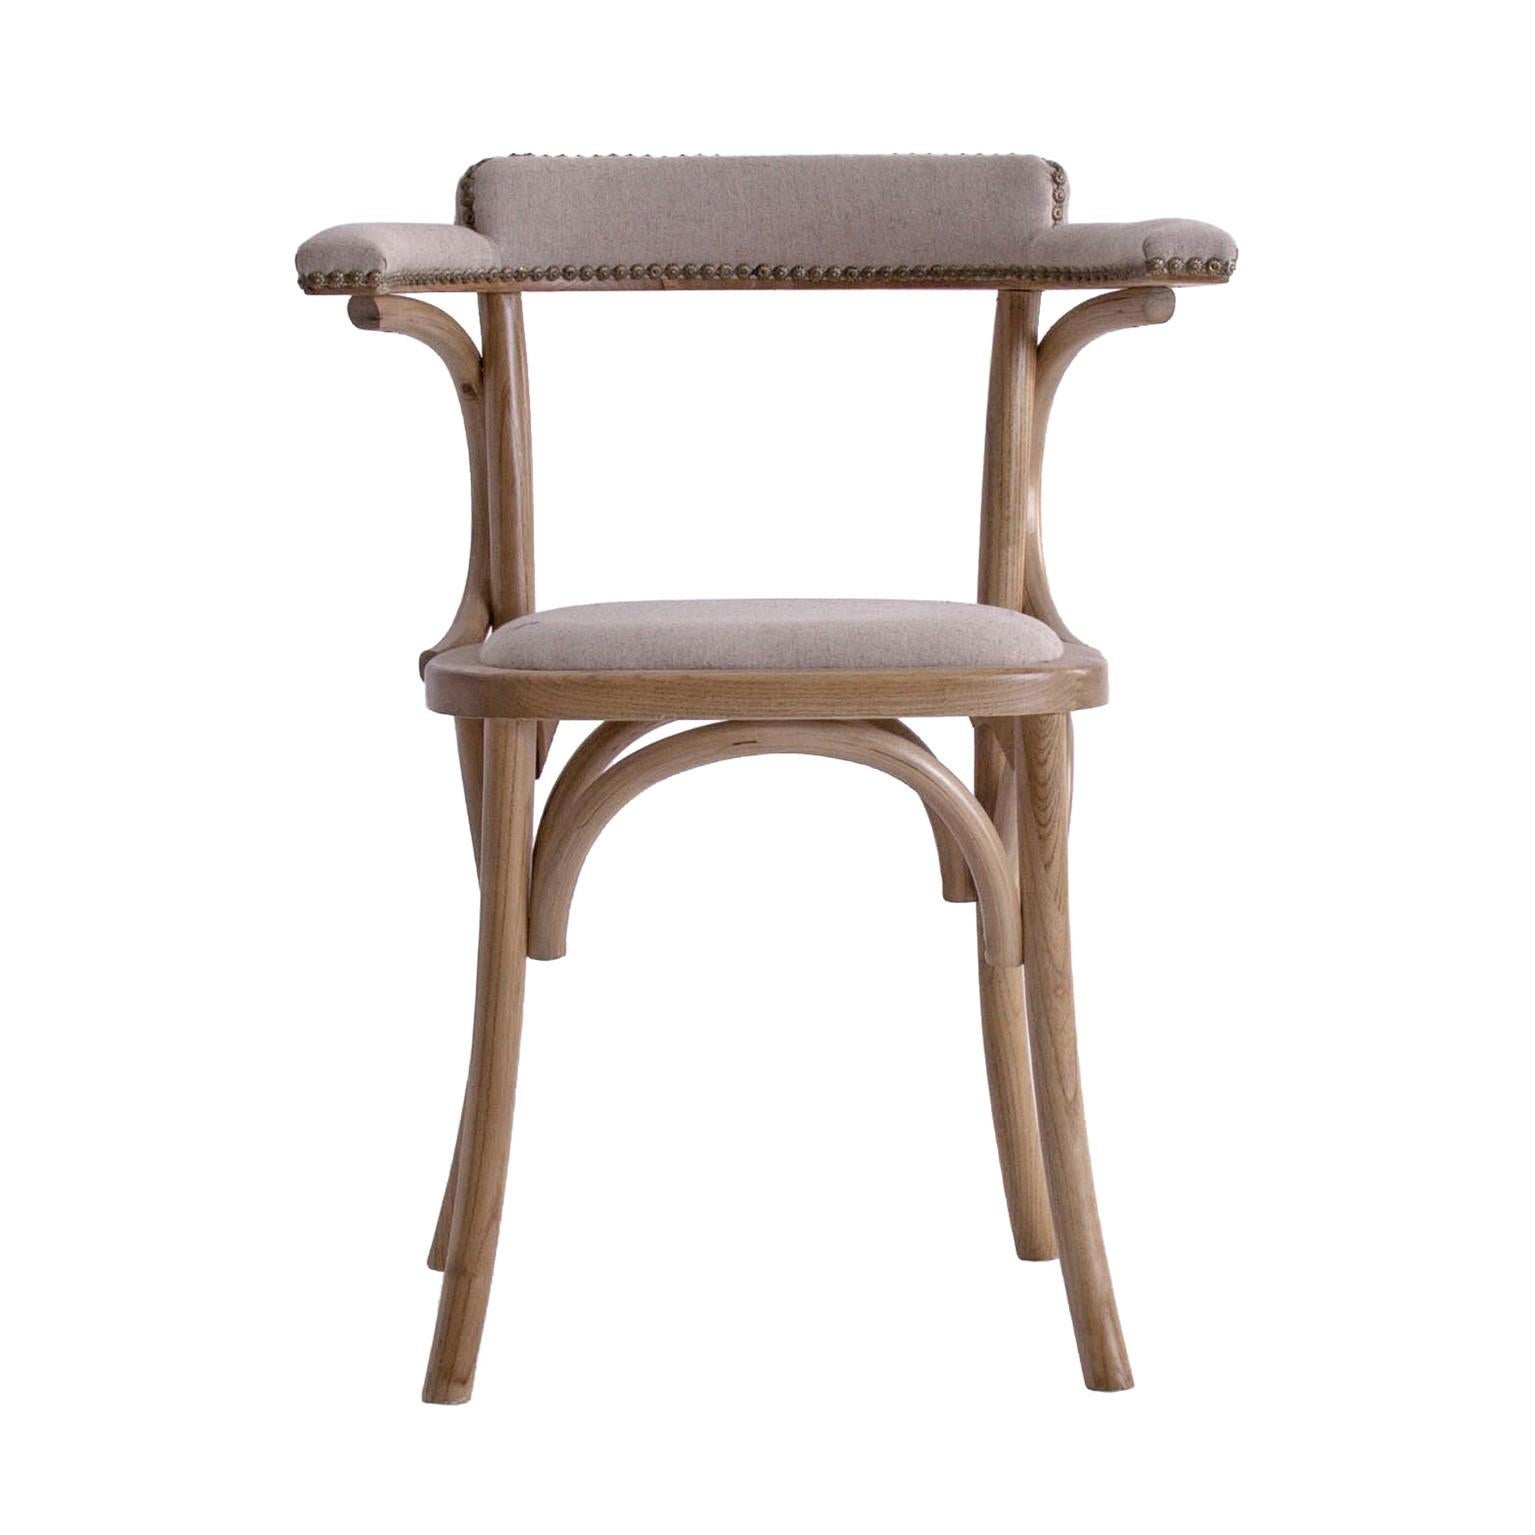 French Bistro design elm curved wood and linen armchair at the manner of Thonet.